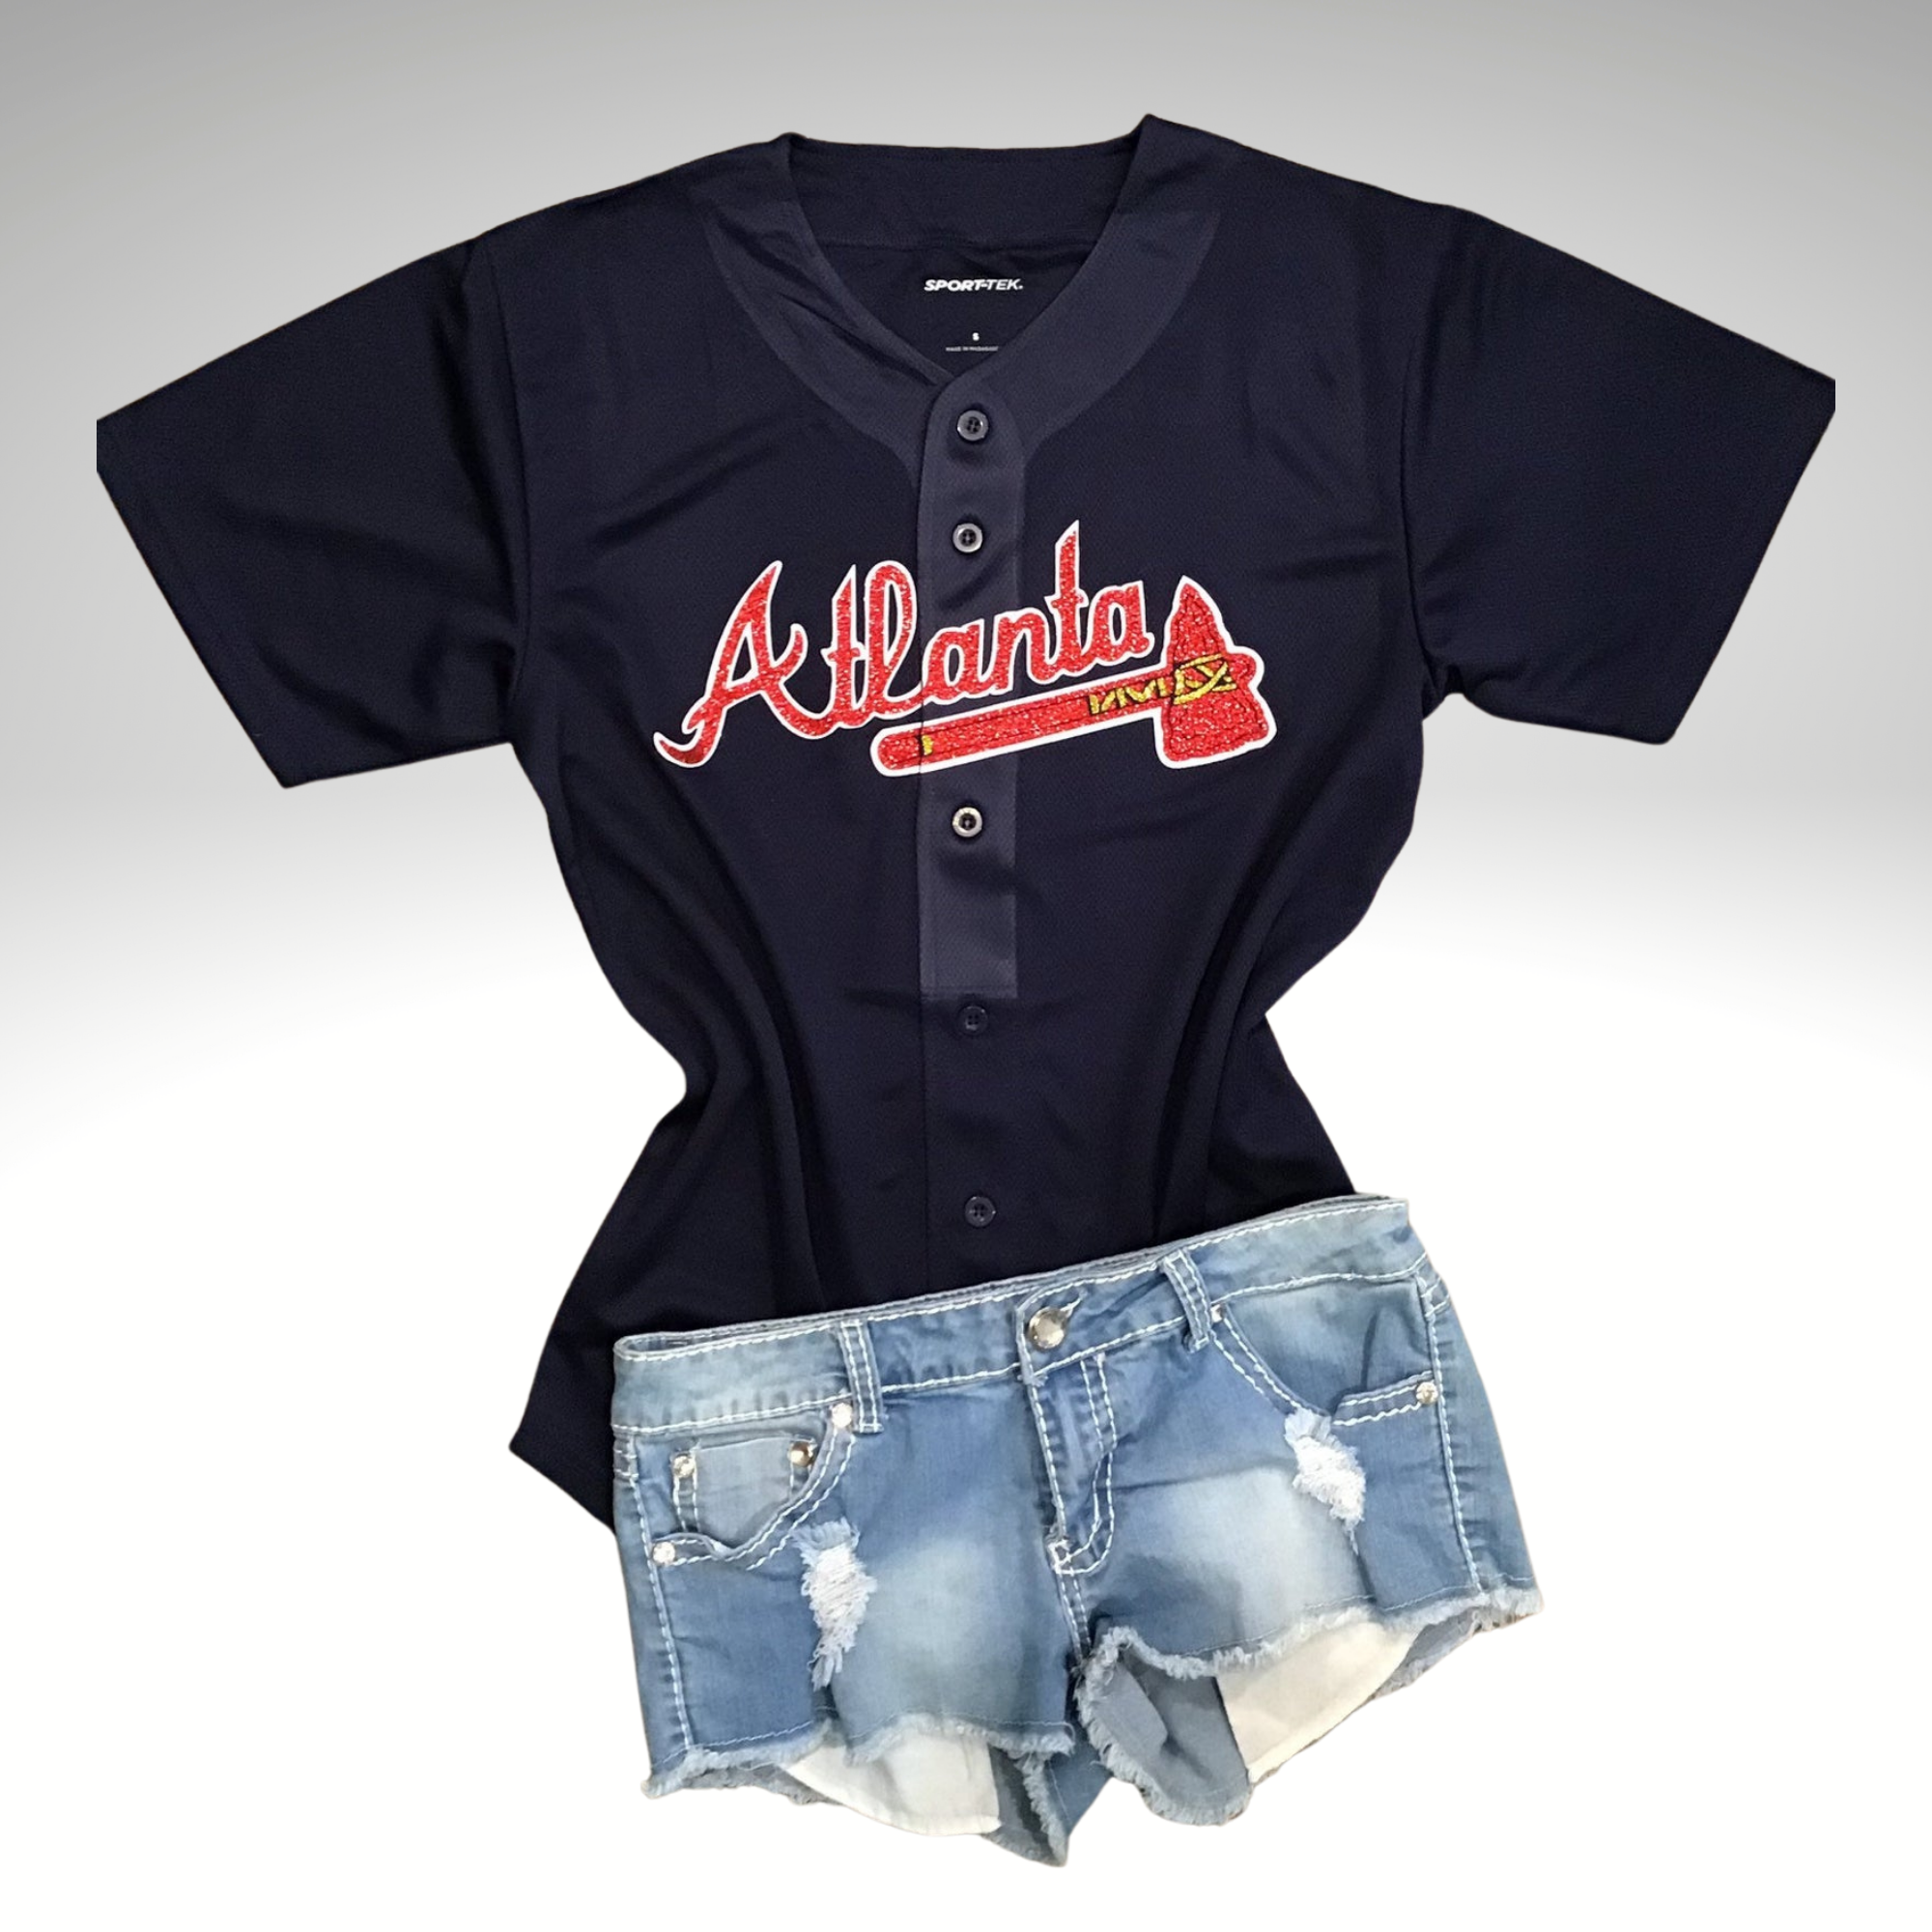 Lulu Grace Designs Boston Red Sox Inspired Baseball Jersey Navy: Baseball Fan Gear & Apparel for Women and Kids Youth/Toddler Tee / M